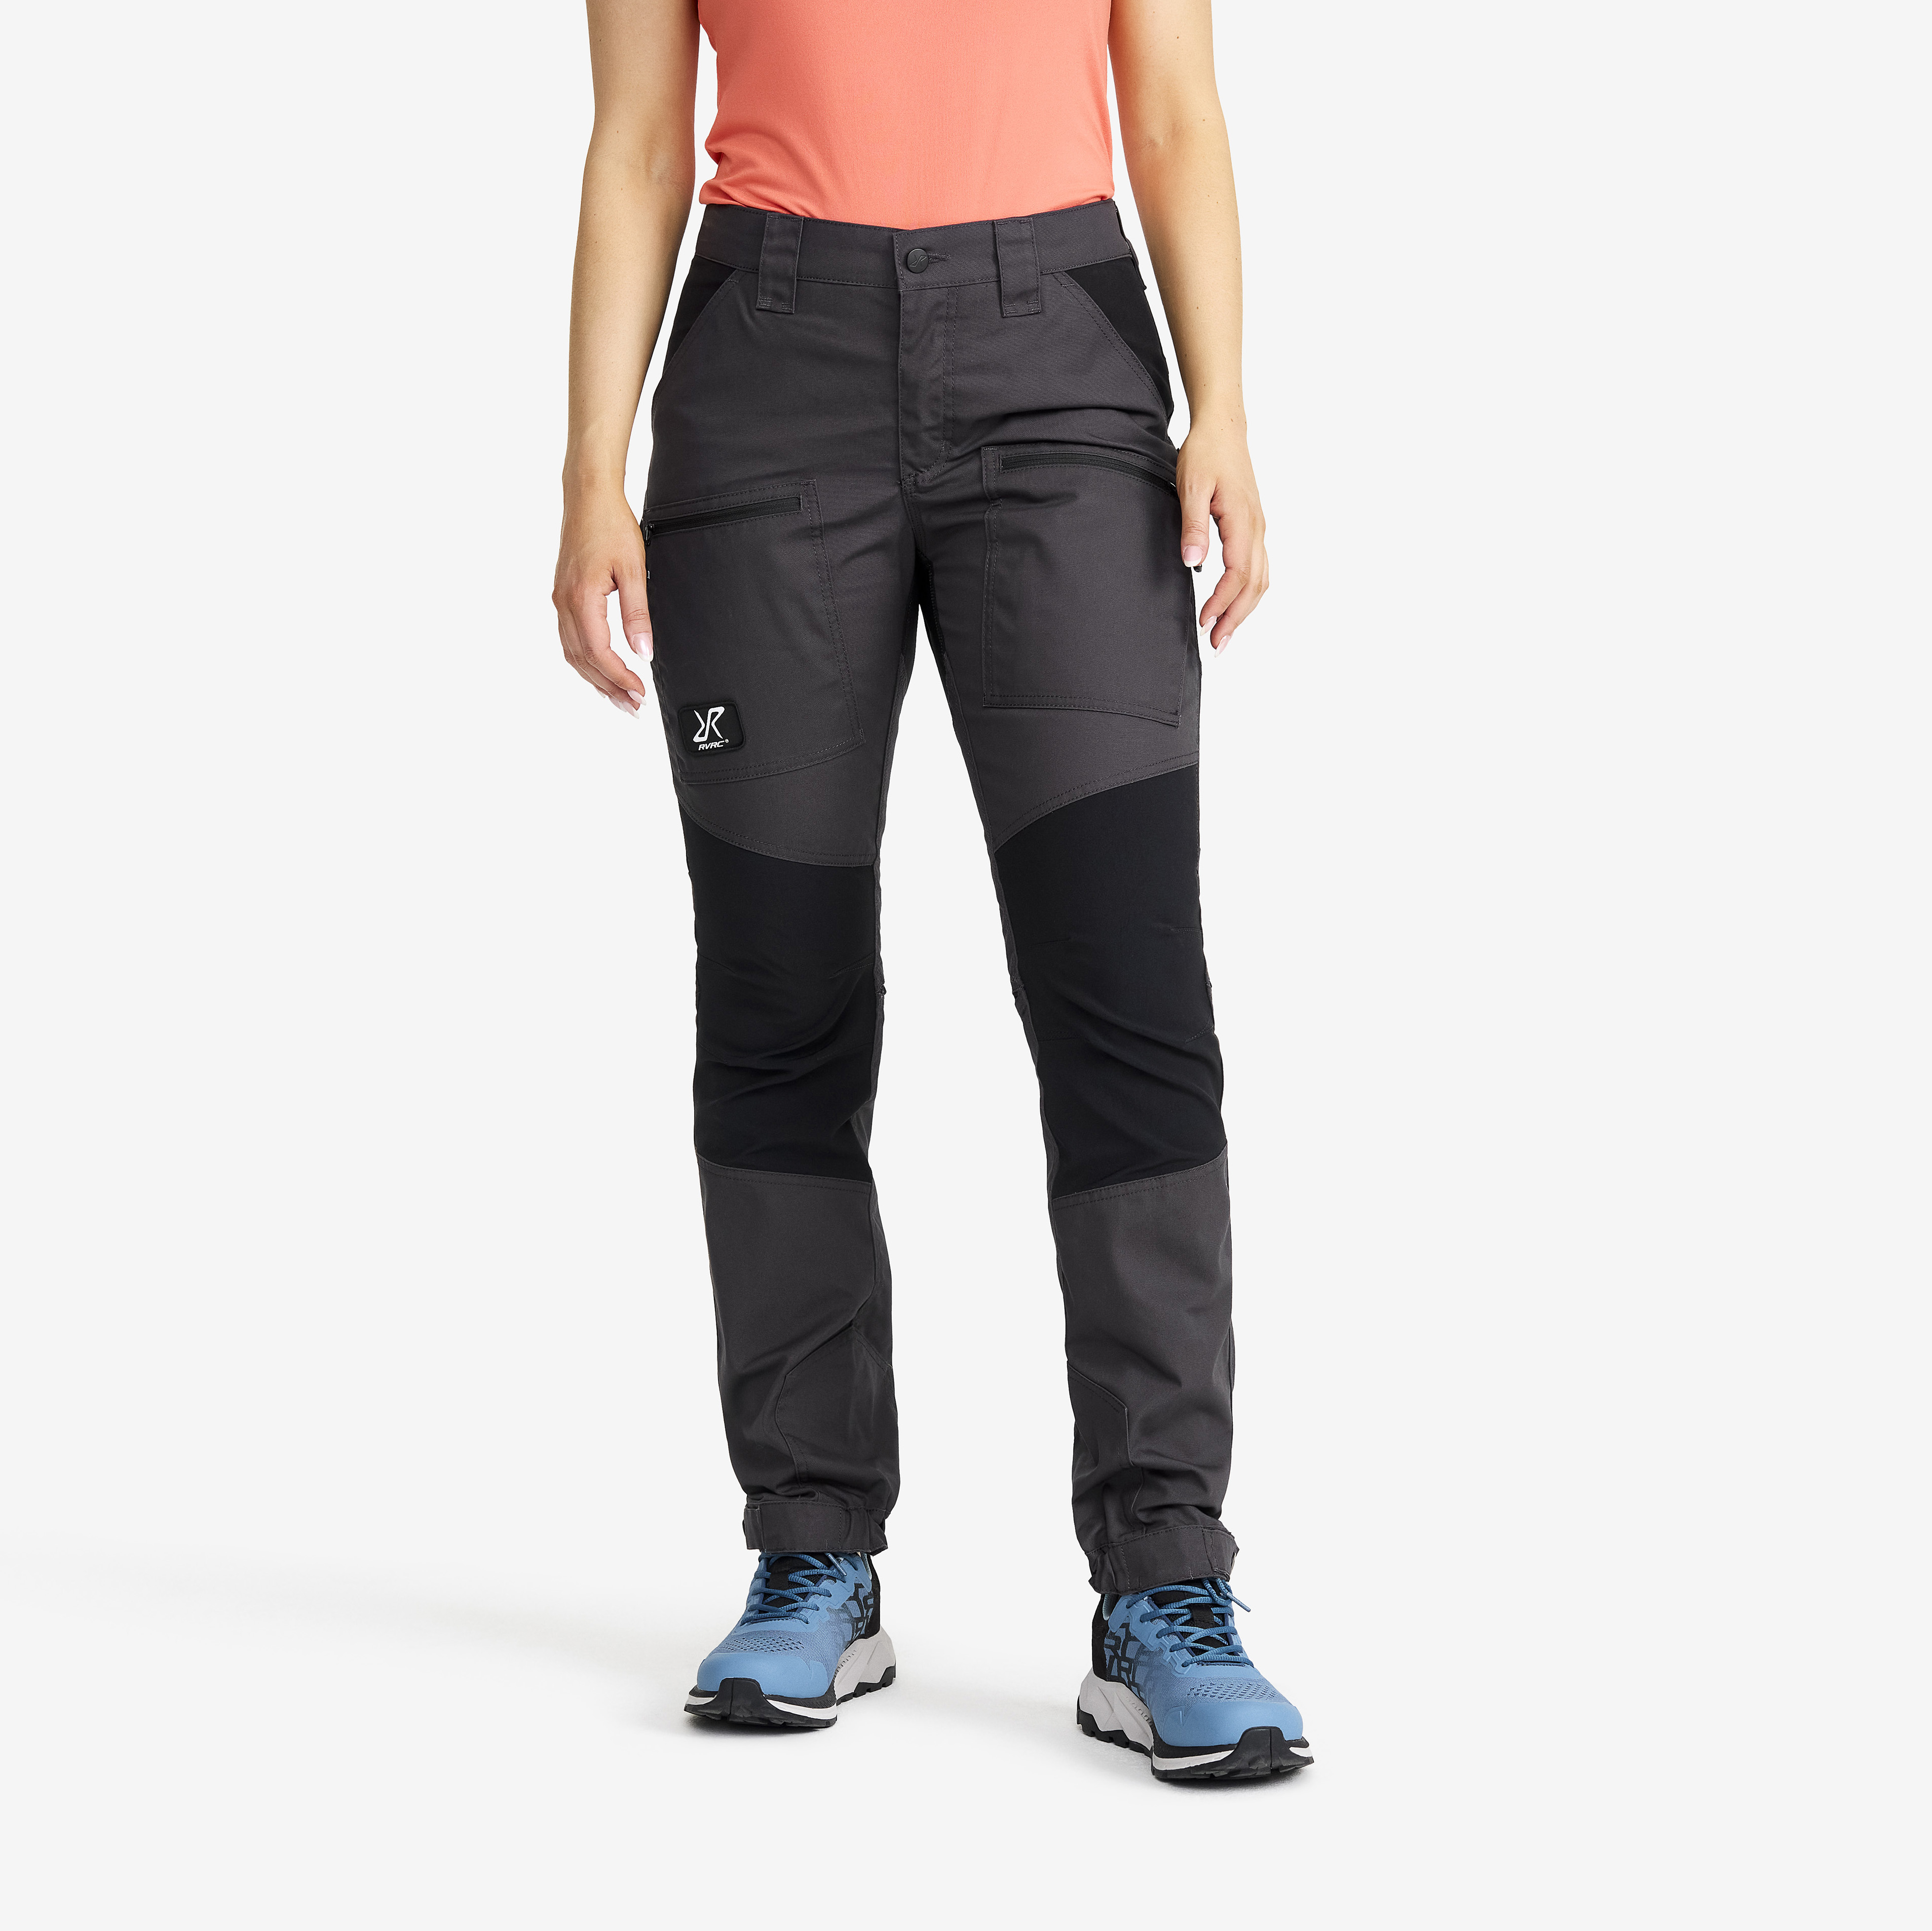 Nordwand Pro Pants Anthracite Naiset